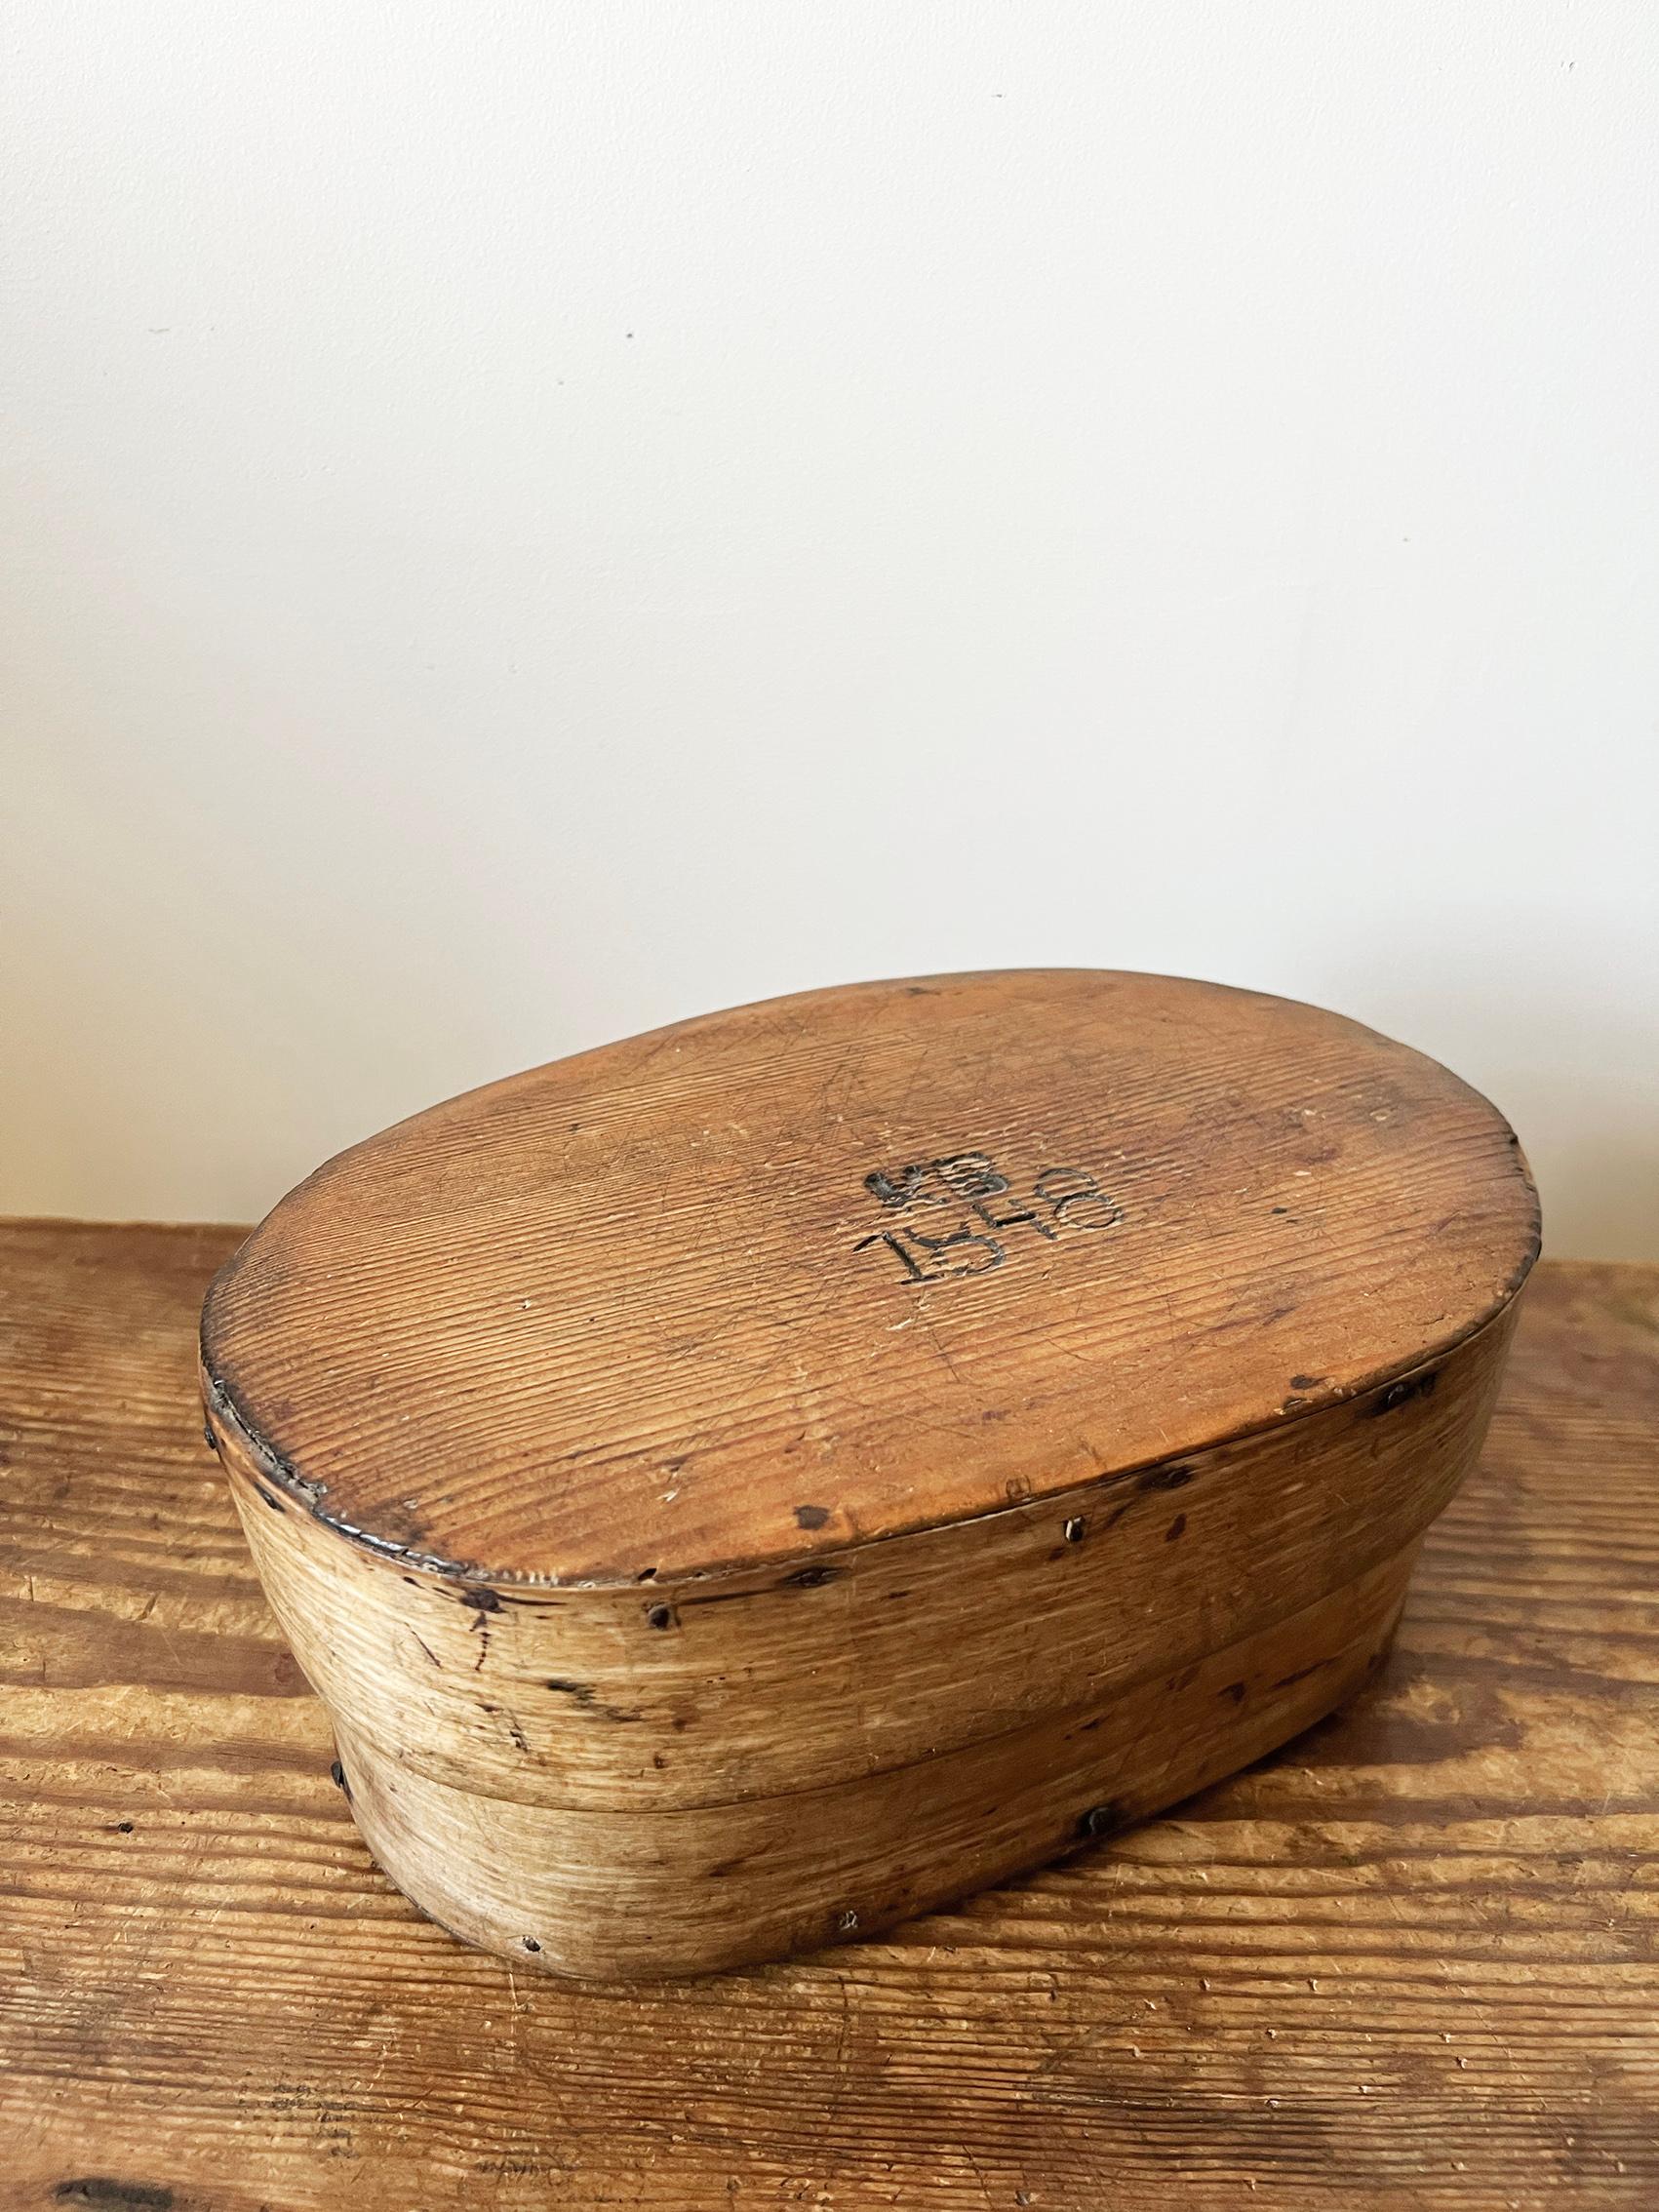 19th Century swedish folk art bentwood box, with nice patina. Owner marks at the top and bottom, KB 1848. Good antique condition with historic knocks, marks, scratches and wear as is to be expected with functional antiques.
Please notice that there